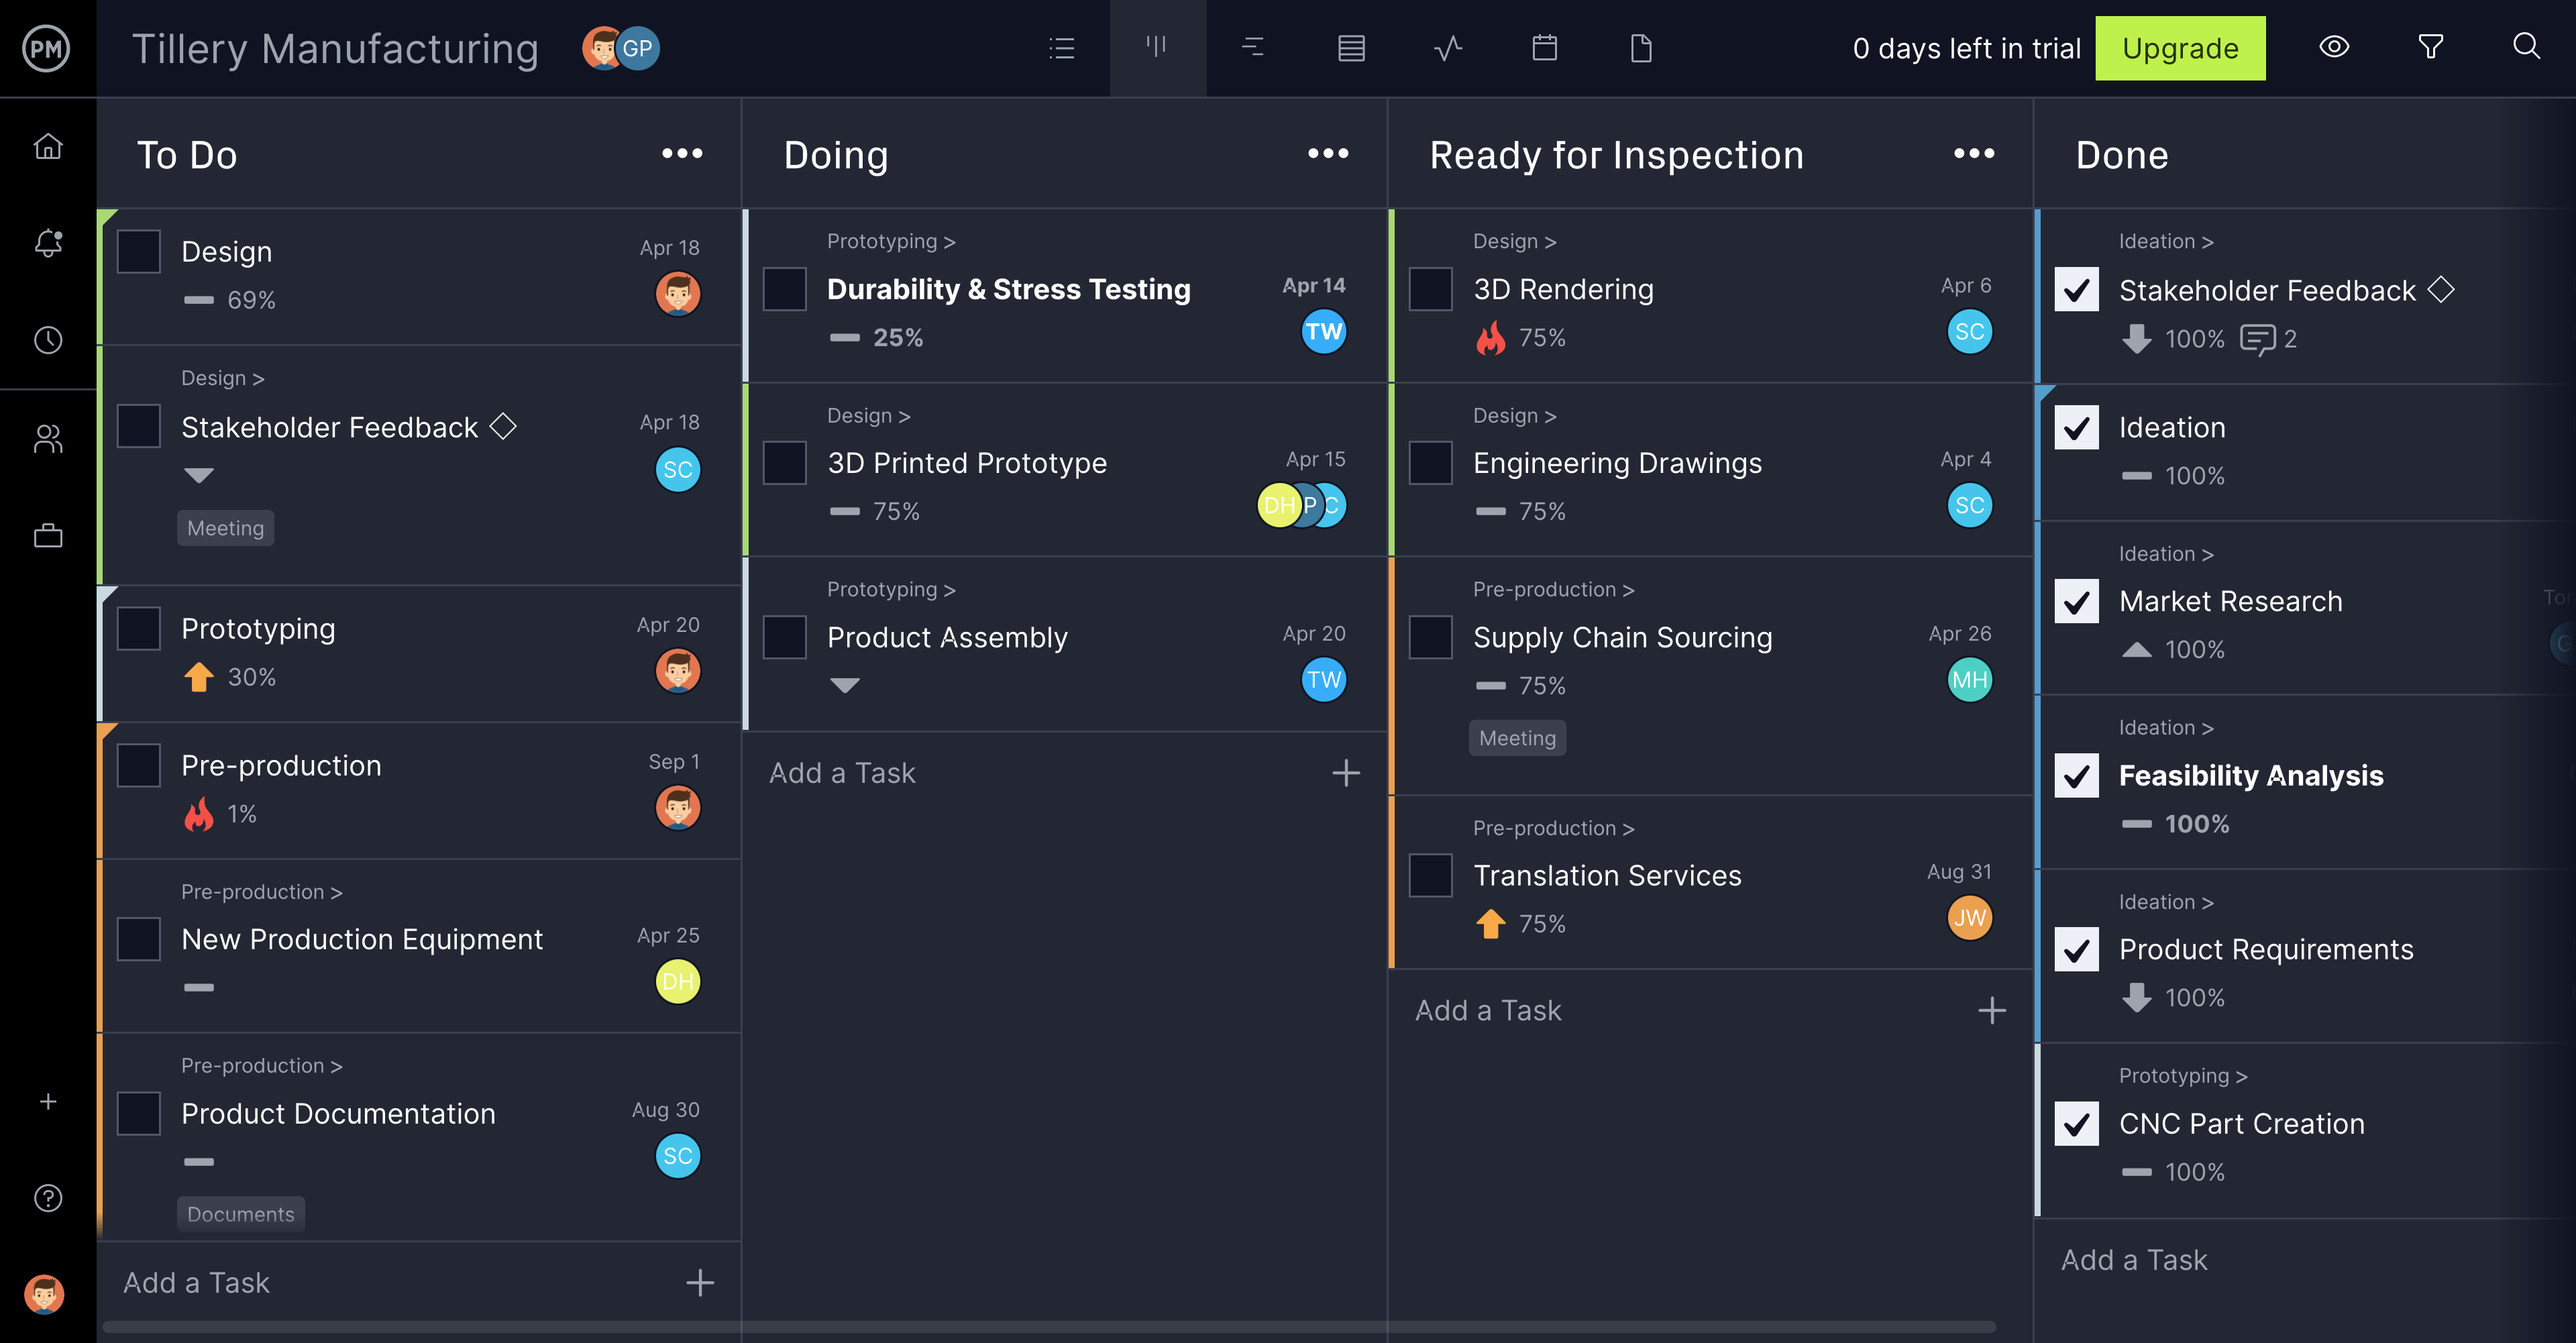 ProjectManager.com Software - The Board view helps teams tailor workflows for their specific needs, pinpoint bottlenecks in production cycles and more.